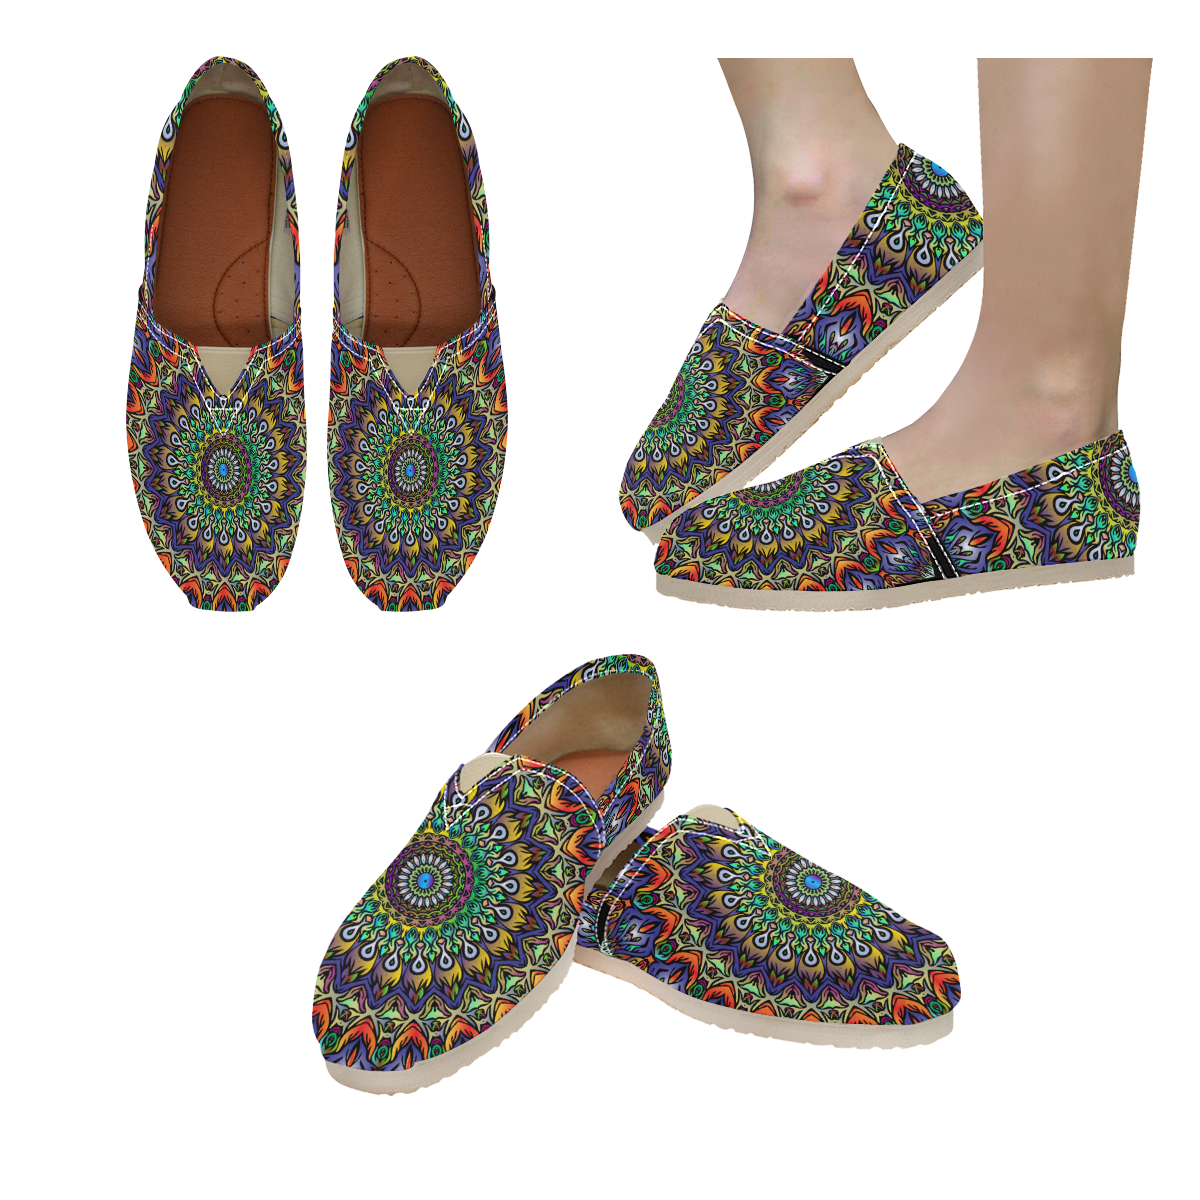 psychedelic shoes Women's Classic Canvas Slip-On (Model 1206)